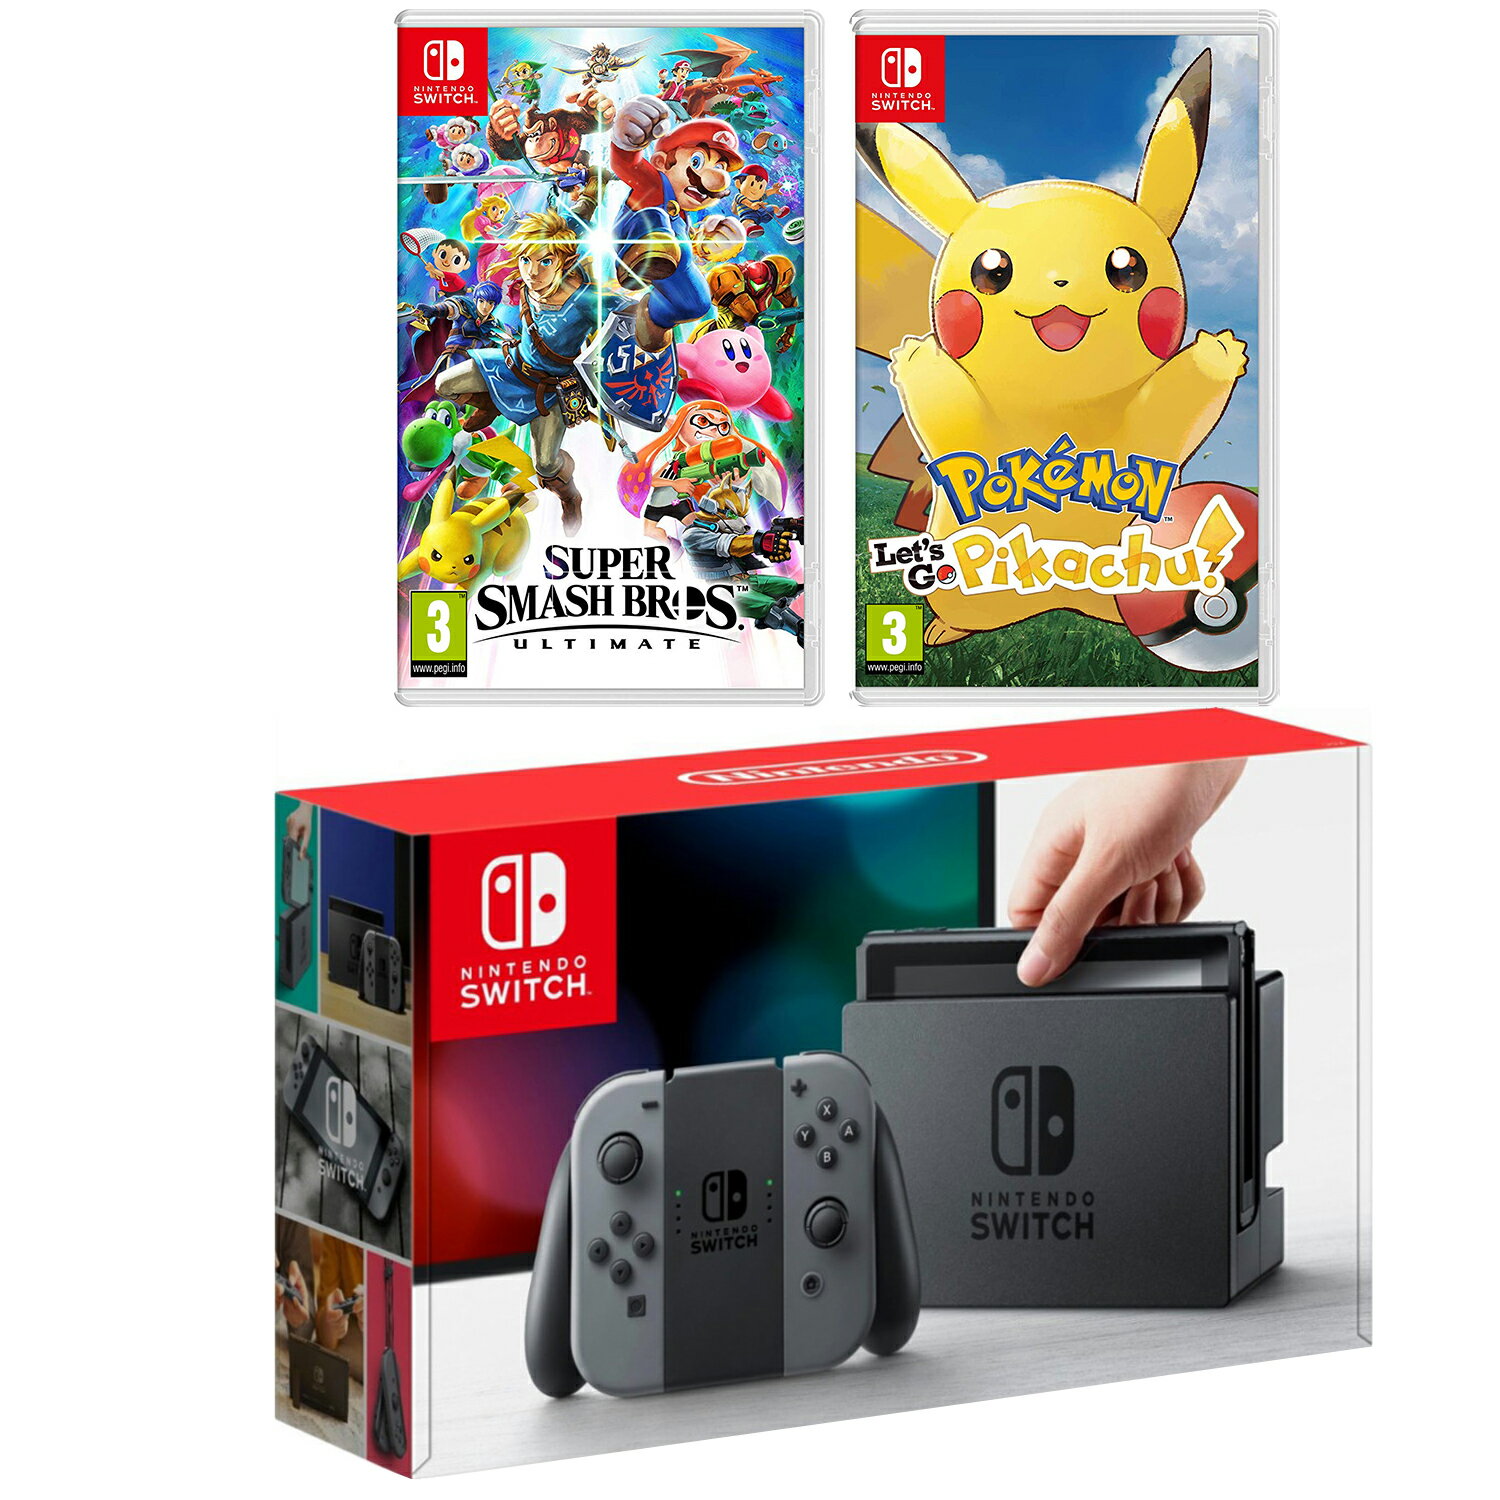 Nintendo Switch Console With Gray Joycon Controllers Super Smash Bros And Pokemon Lets Go Pikachu